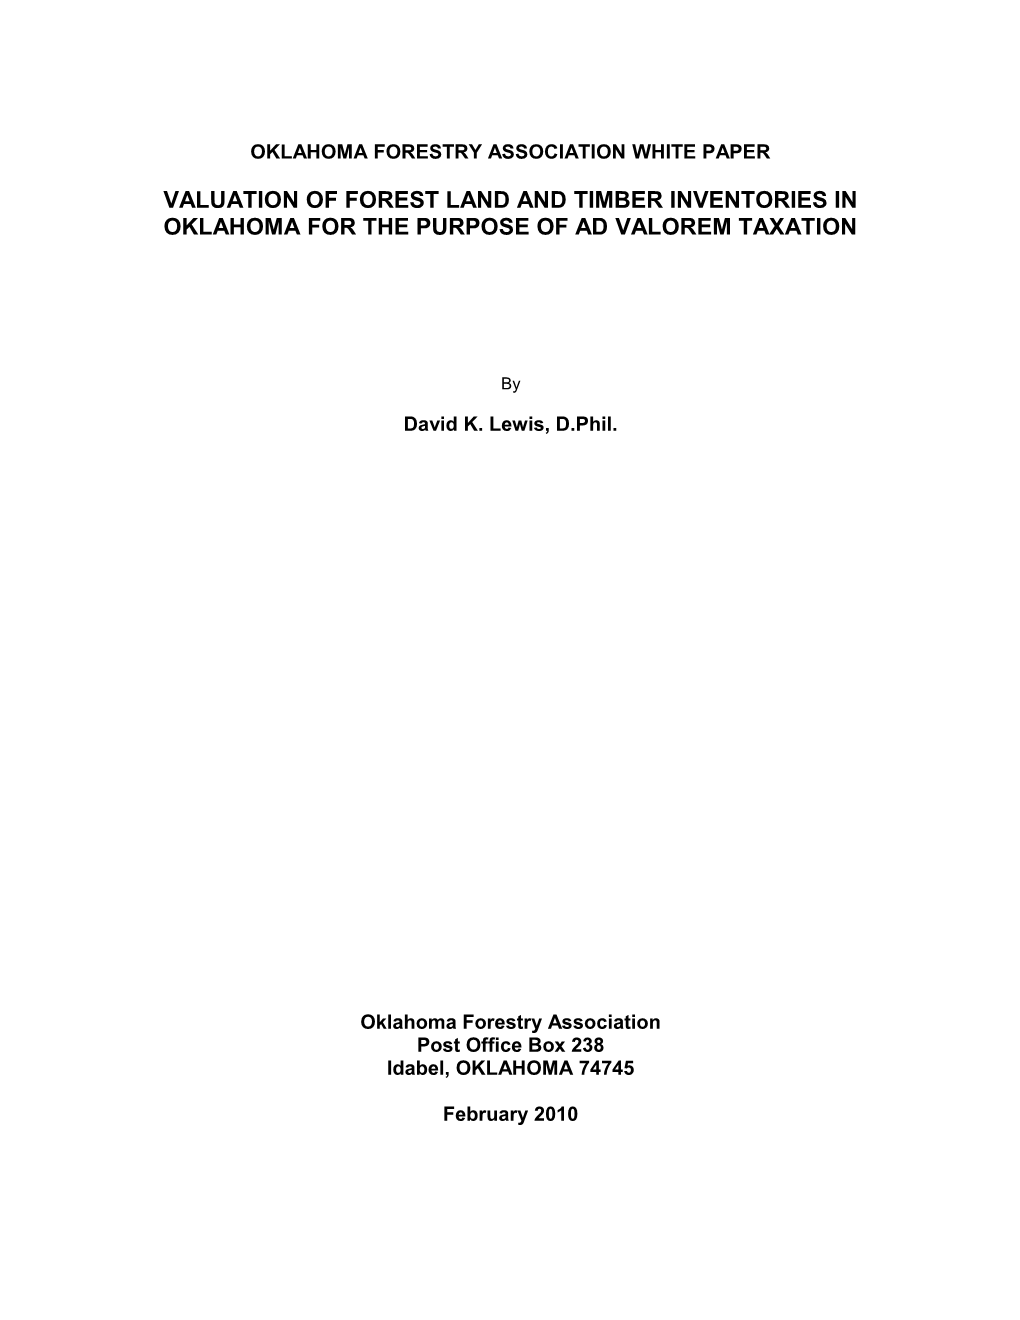 Valuation of Timber Inventories and Timberland for Ad Valorem Tax Purposes: a Summary Of